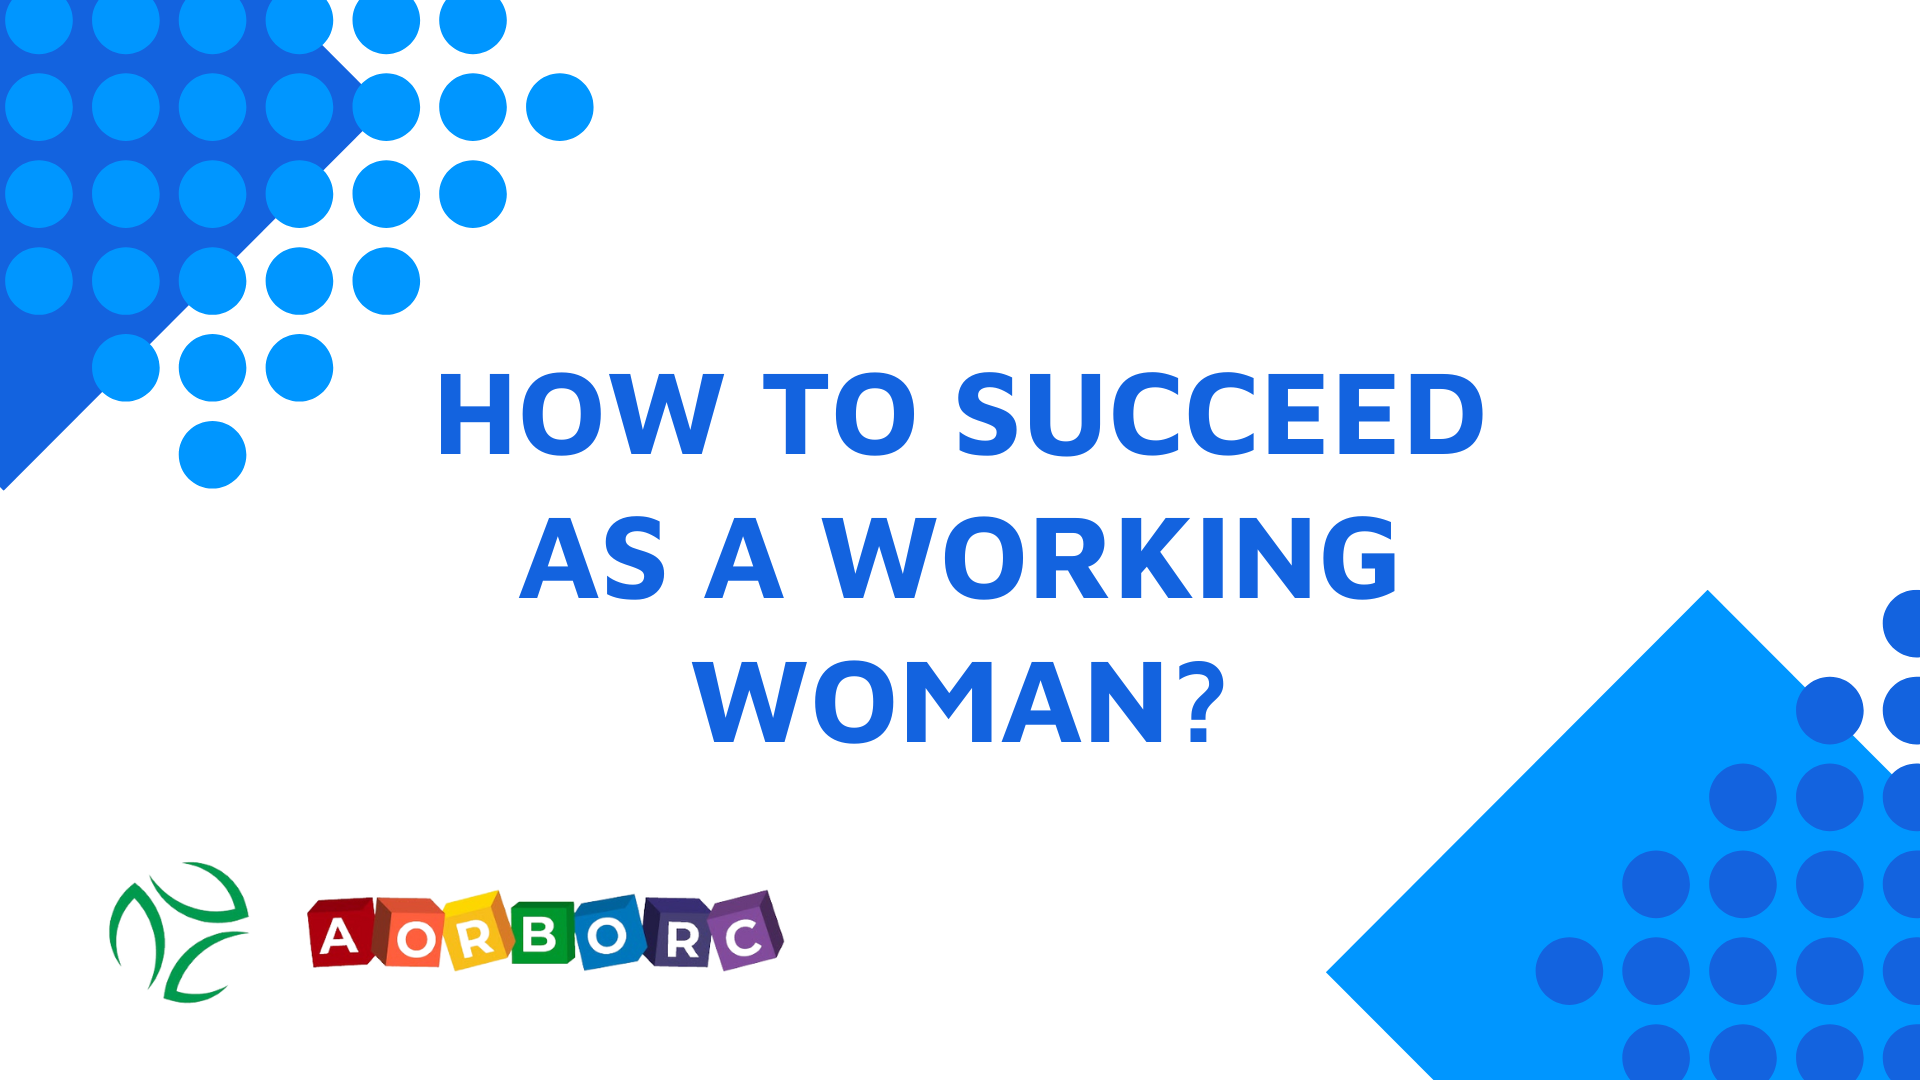 <strong>How To Succeed As A Working Woman: 10 Killer Tips</strong>